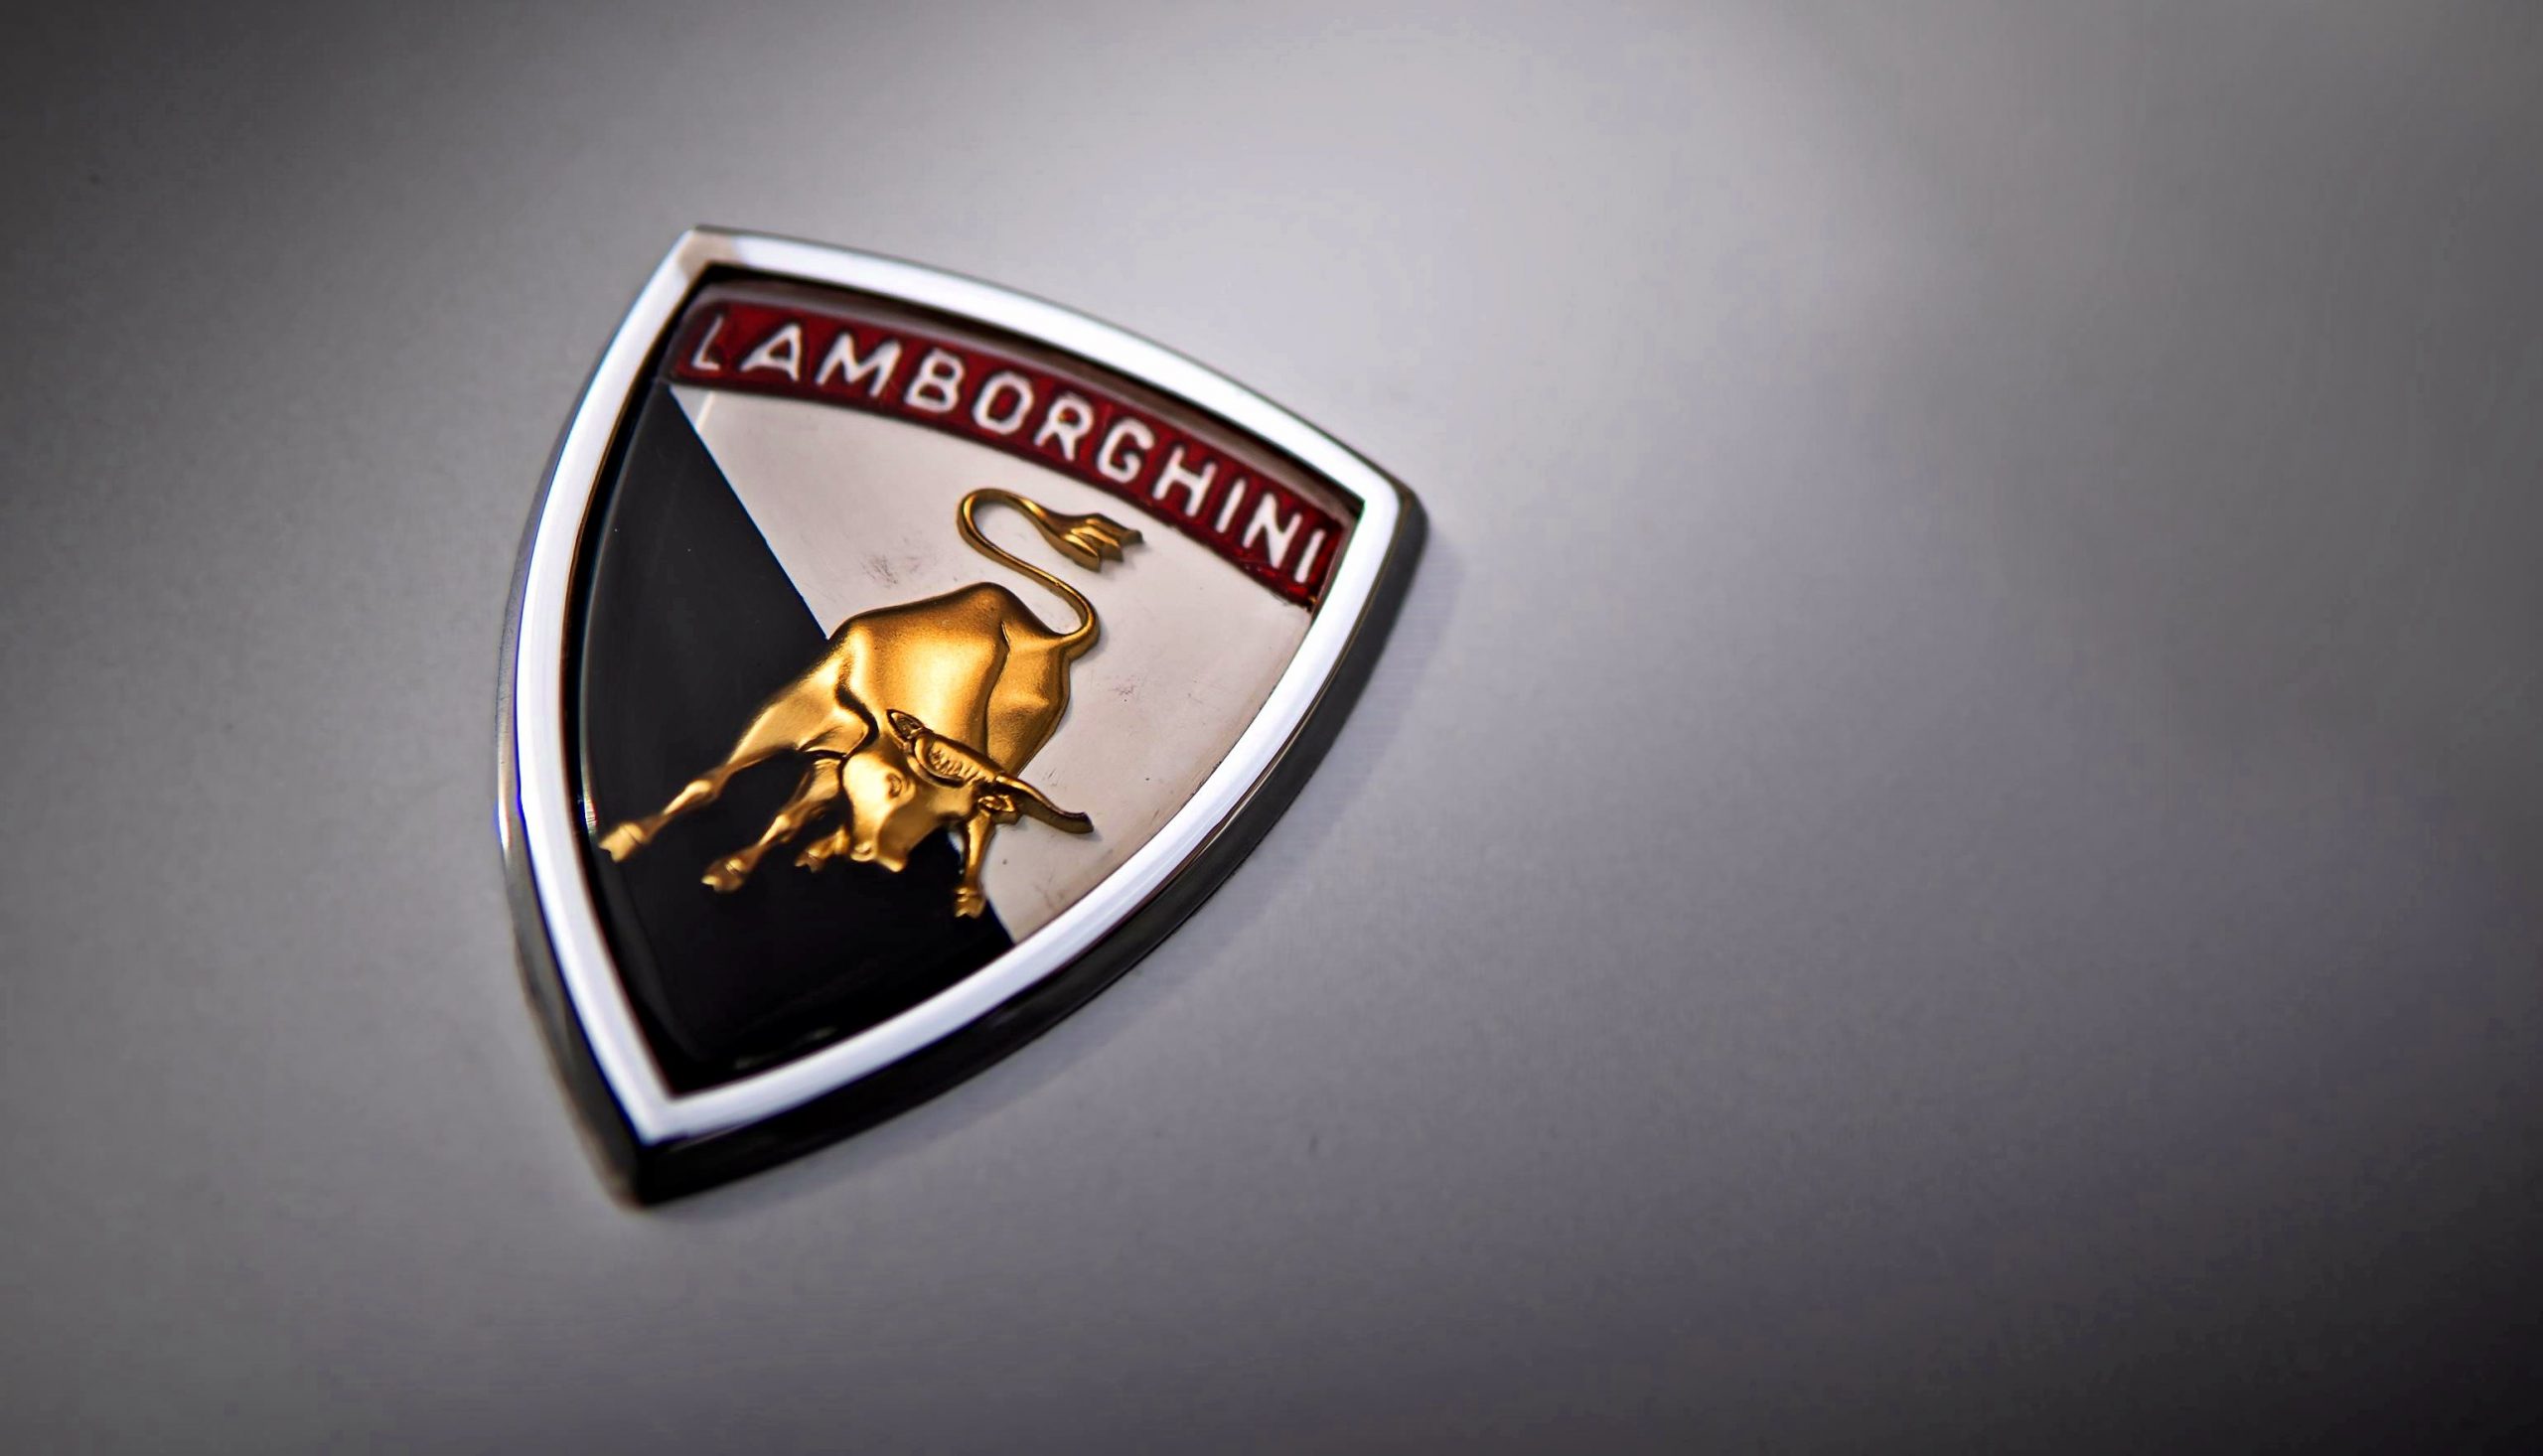 Lamborghini: The Man Behind The Legend Promises To Be The Next